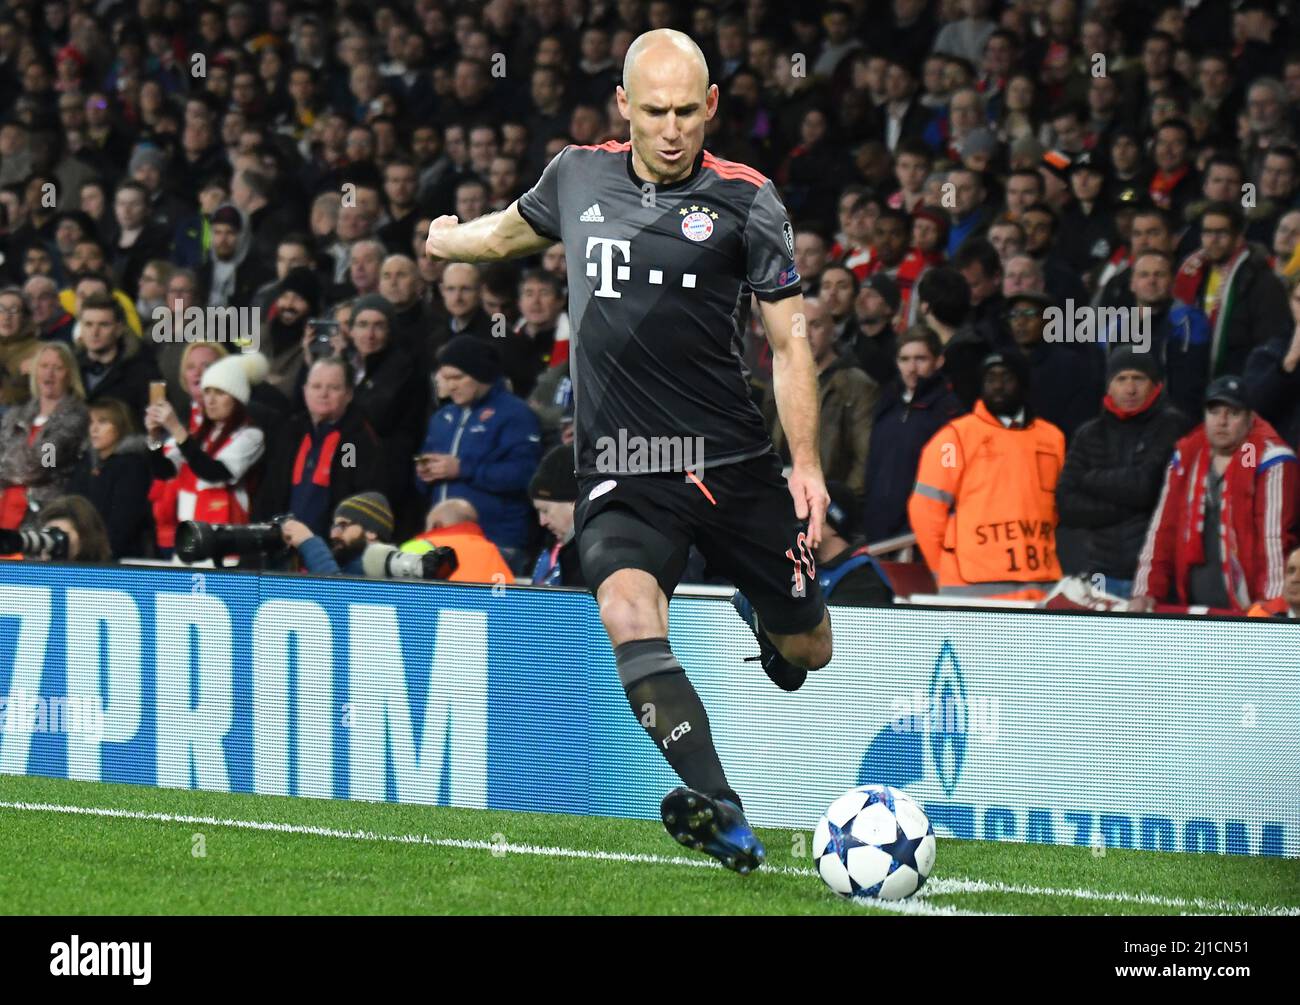 LONDON, ENGLAND - MARCH 7, 2017: Arjen Robben pictured during the second leg of the UEFA Champions League Round of 16 game between Arsenal FC and Bayern Munchen at Emirates Stadium. Copyright: Cosmin Iftode/Picstaff Stock Photo